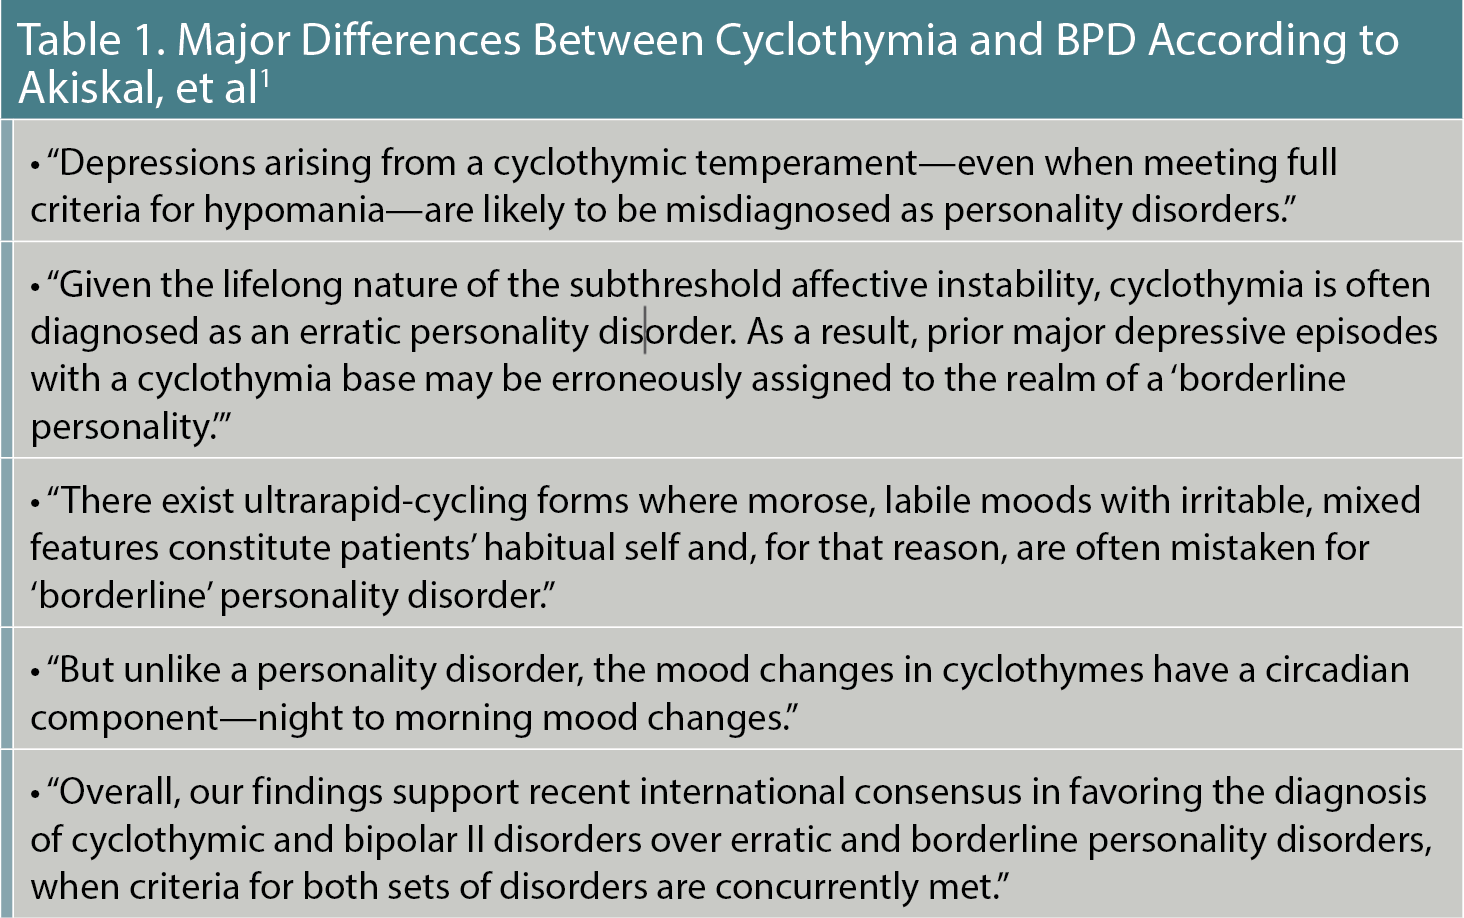 Table 1. Major Differences Between Cyclothymia and BPD According to Akiskal, et al